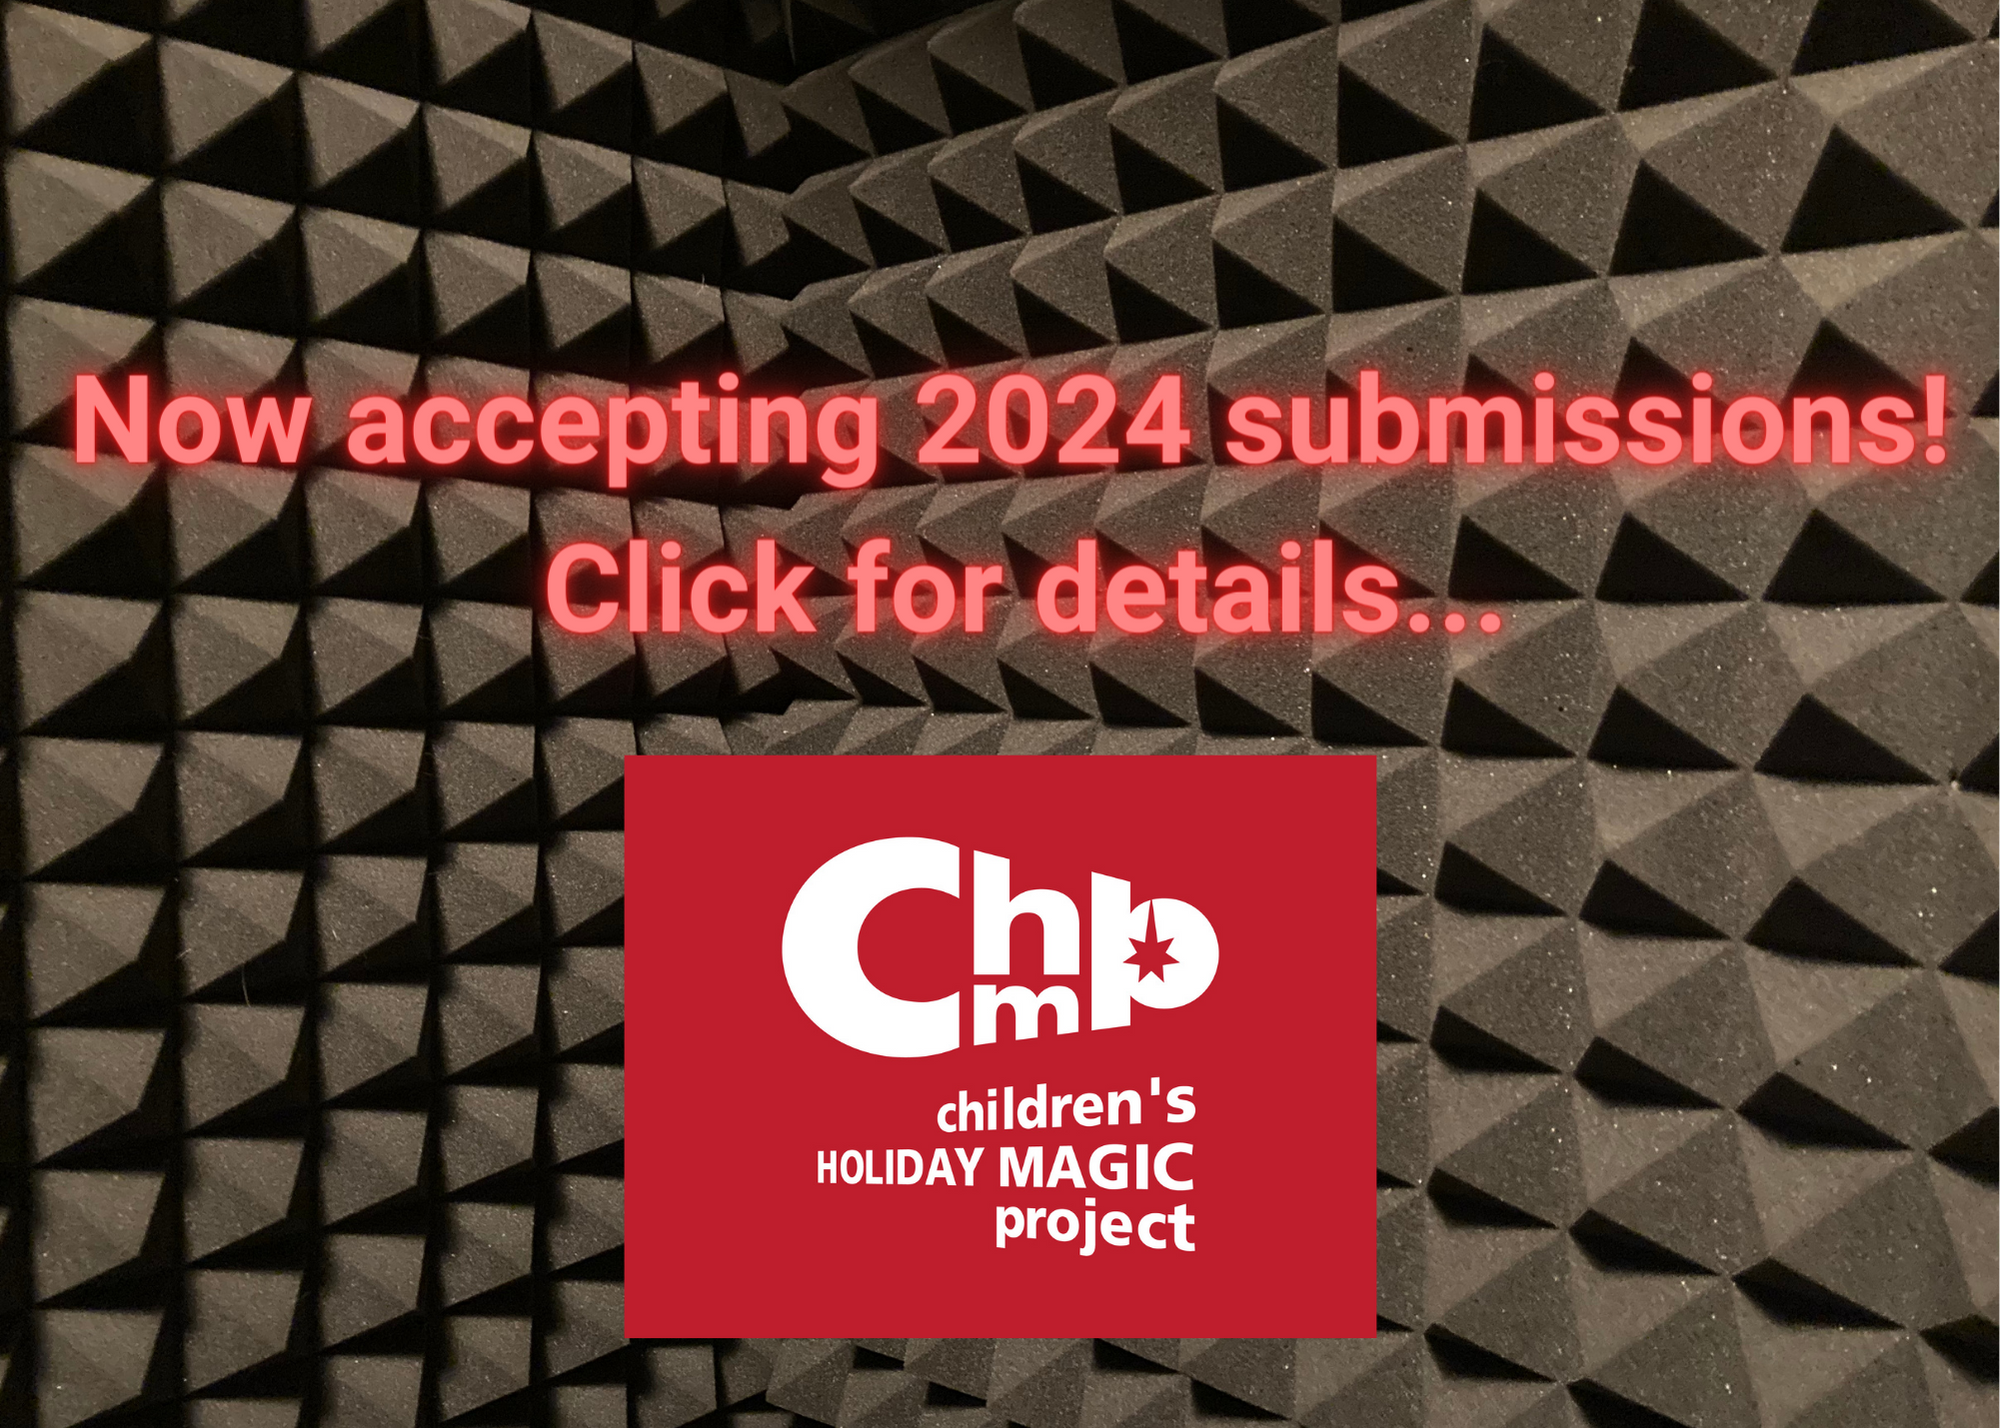 Now accepting 2024 submissions! Click for details... (2)